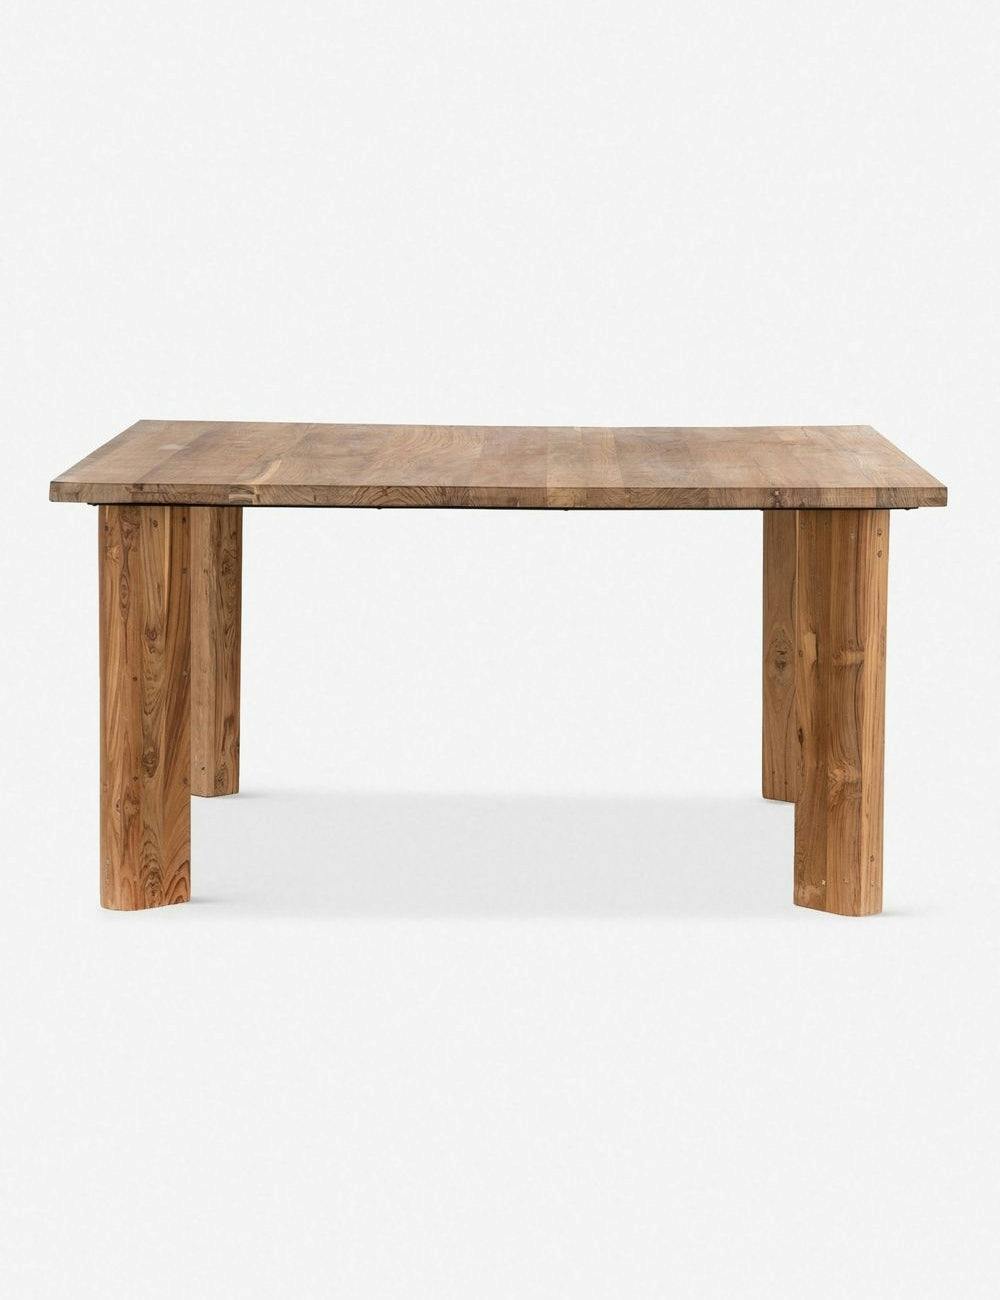 Modern Merritt Square Reclaimed Teak Dining Table with Marble Accent